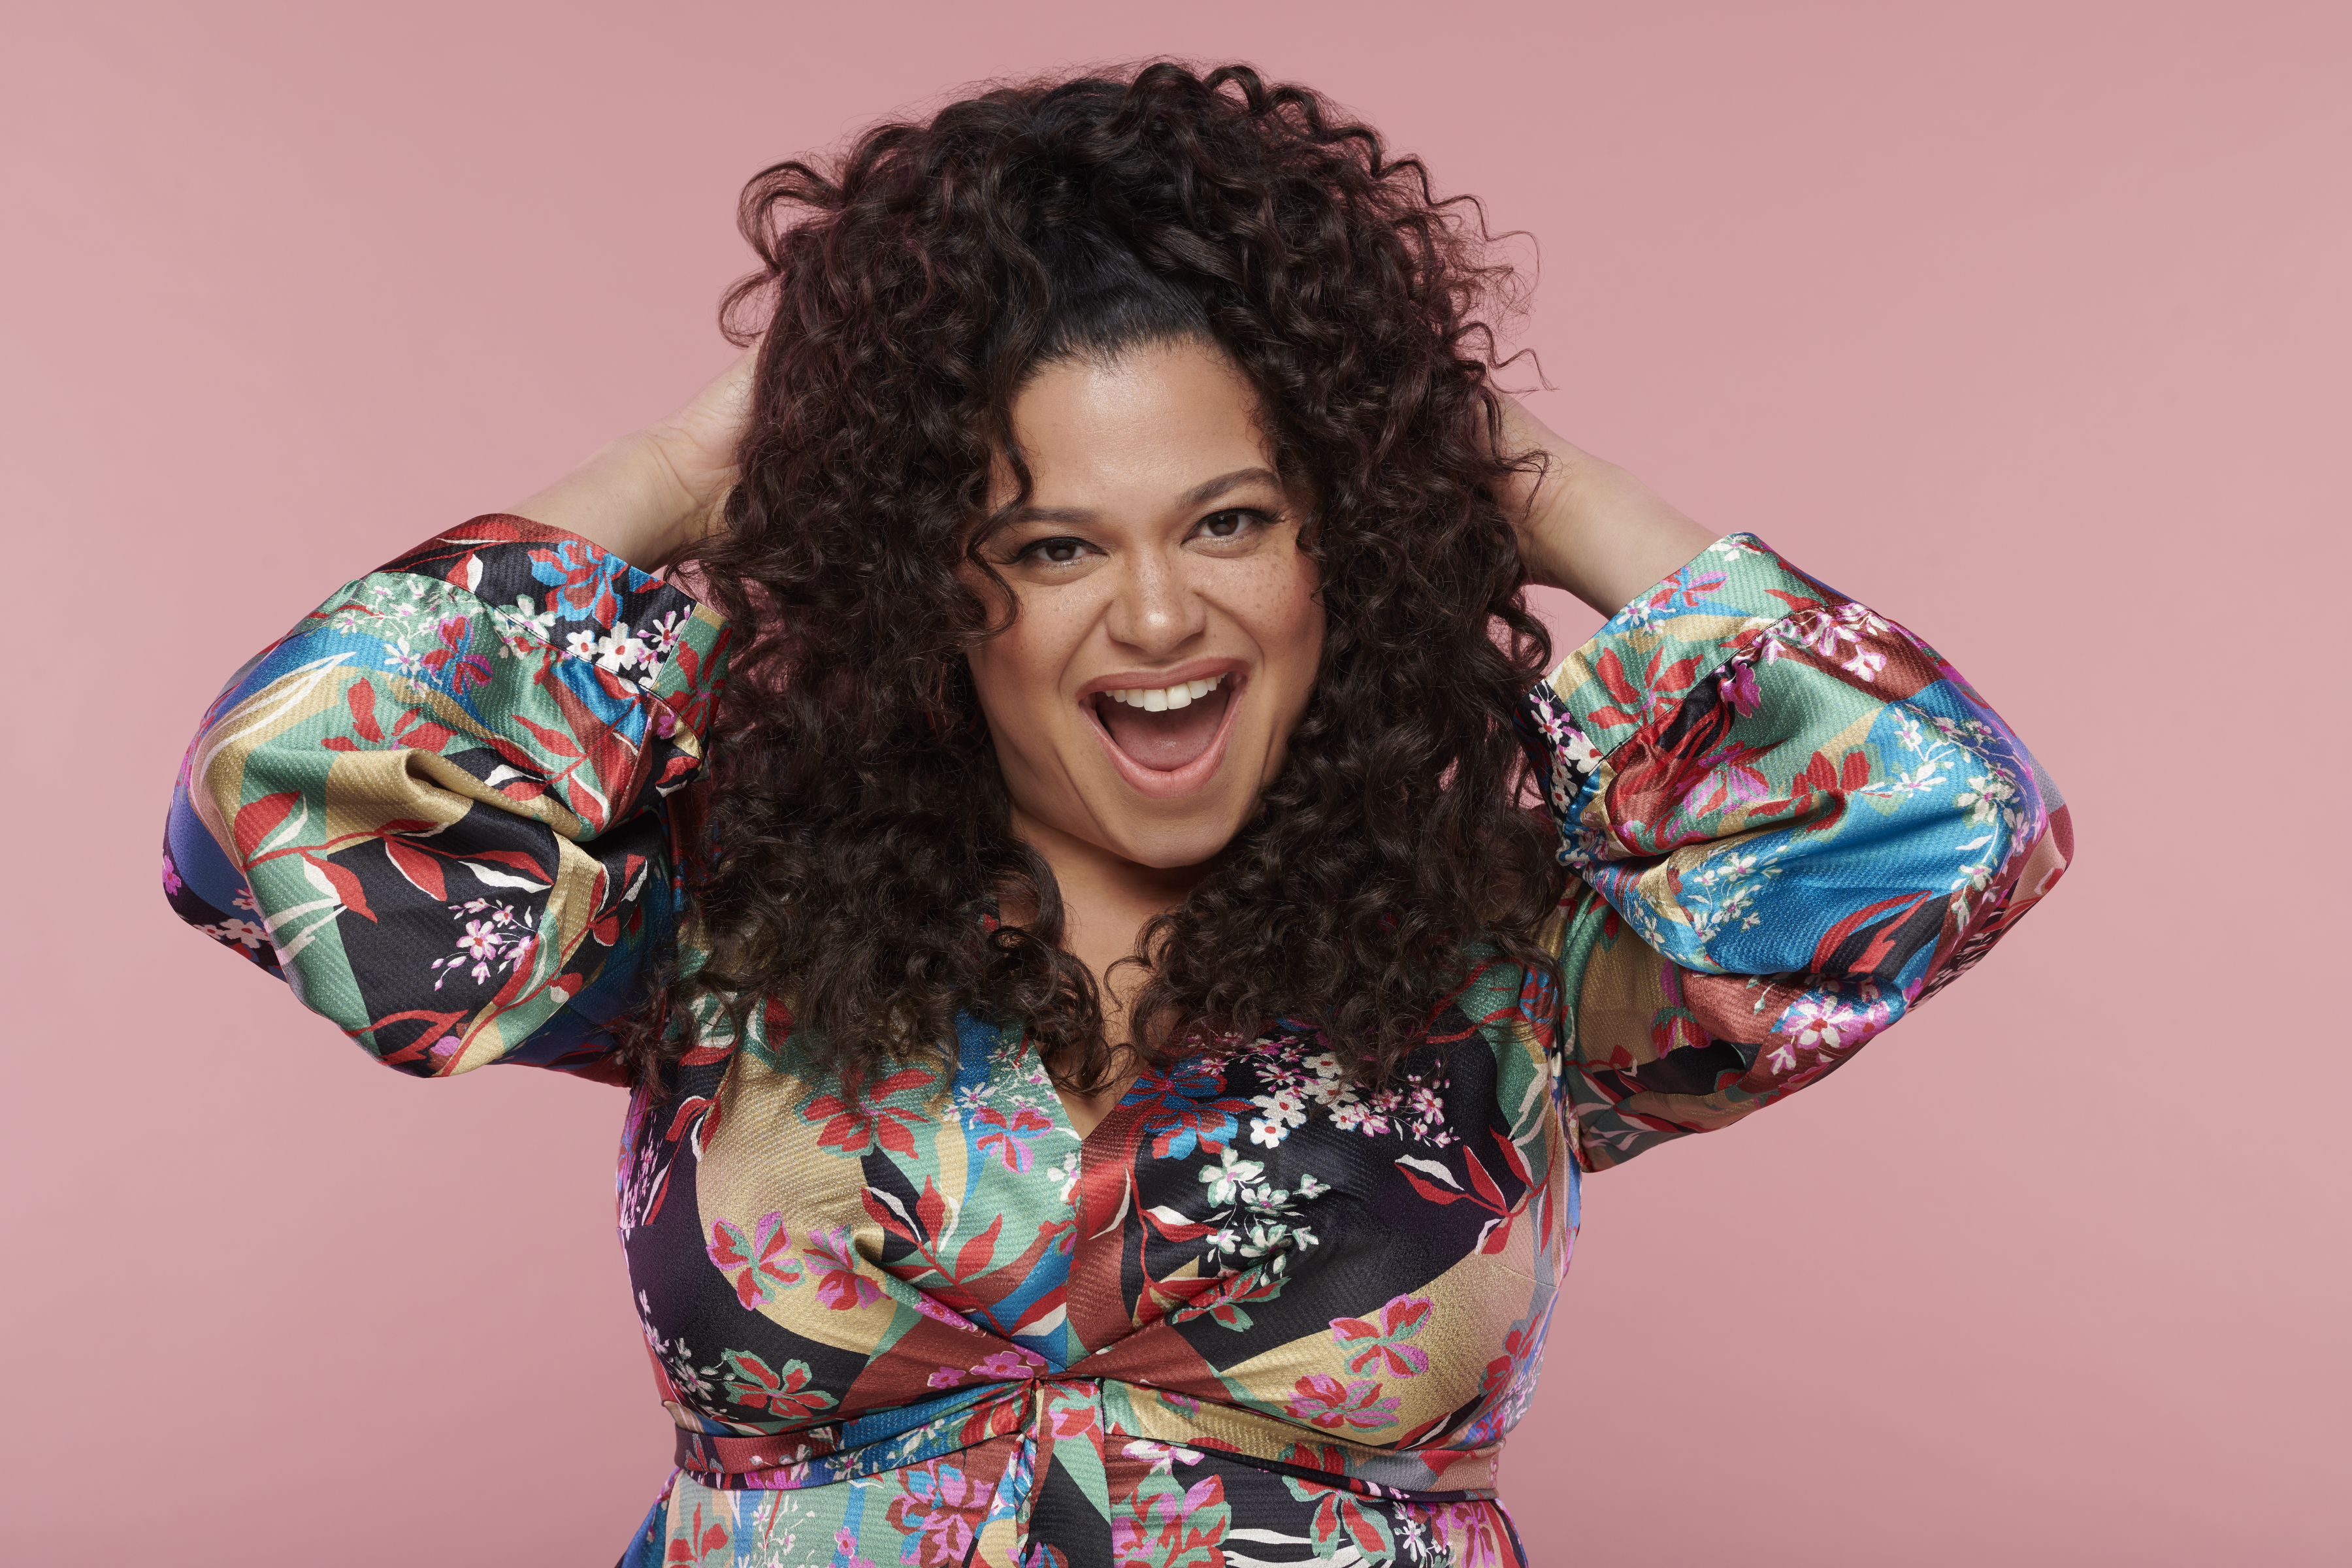 Michelle Buteau stars in 'Survival of the Thickest' Netflix trailer